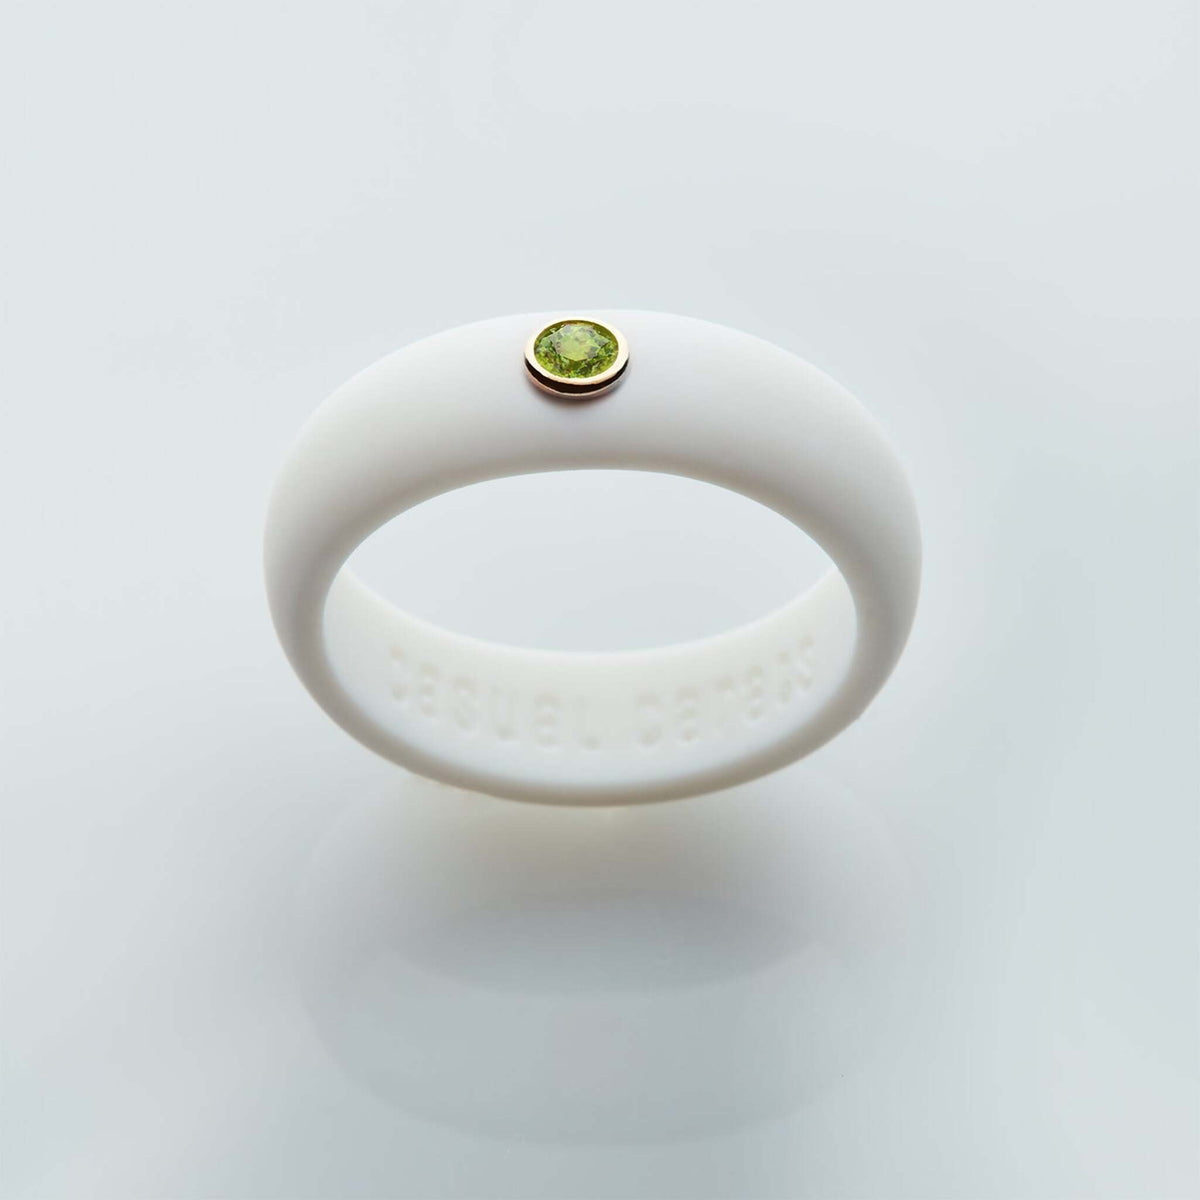 Casual Carats - Birthstone Collection - August - Peridot Silicone Ring / Available in a Variety of Silicone Band Colors